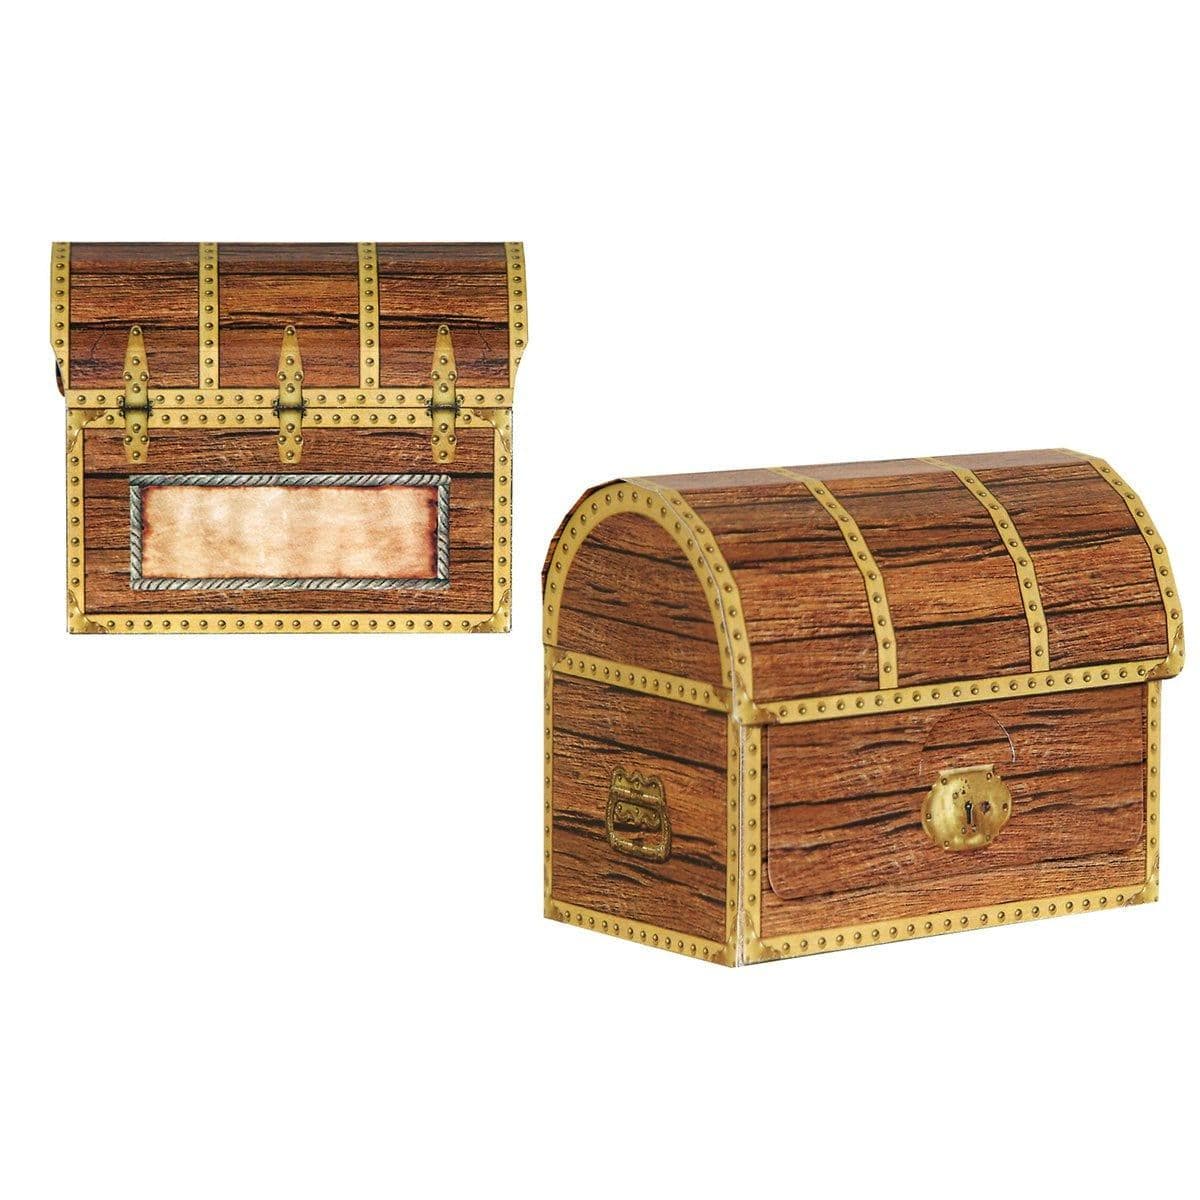 Buy Theme Party Pirate Treasure Chest Favor Boxes, 4 per Package sold at Party Expert